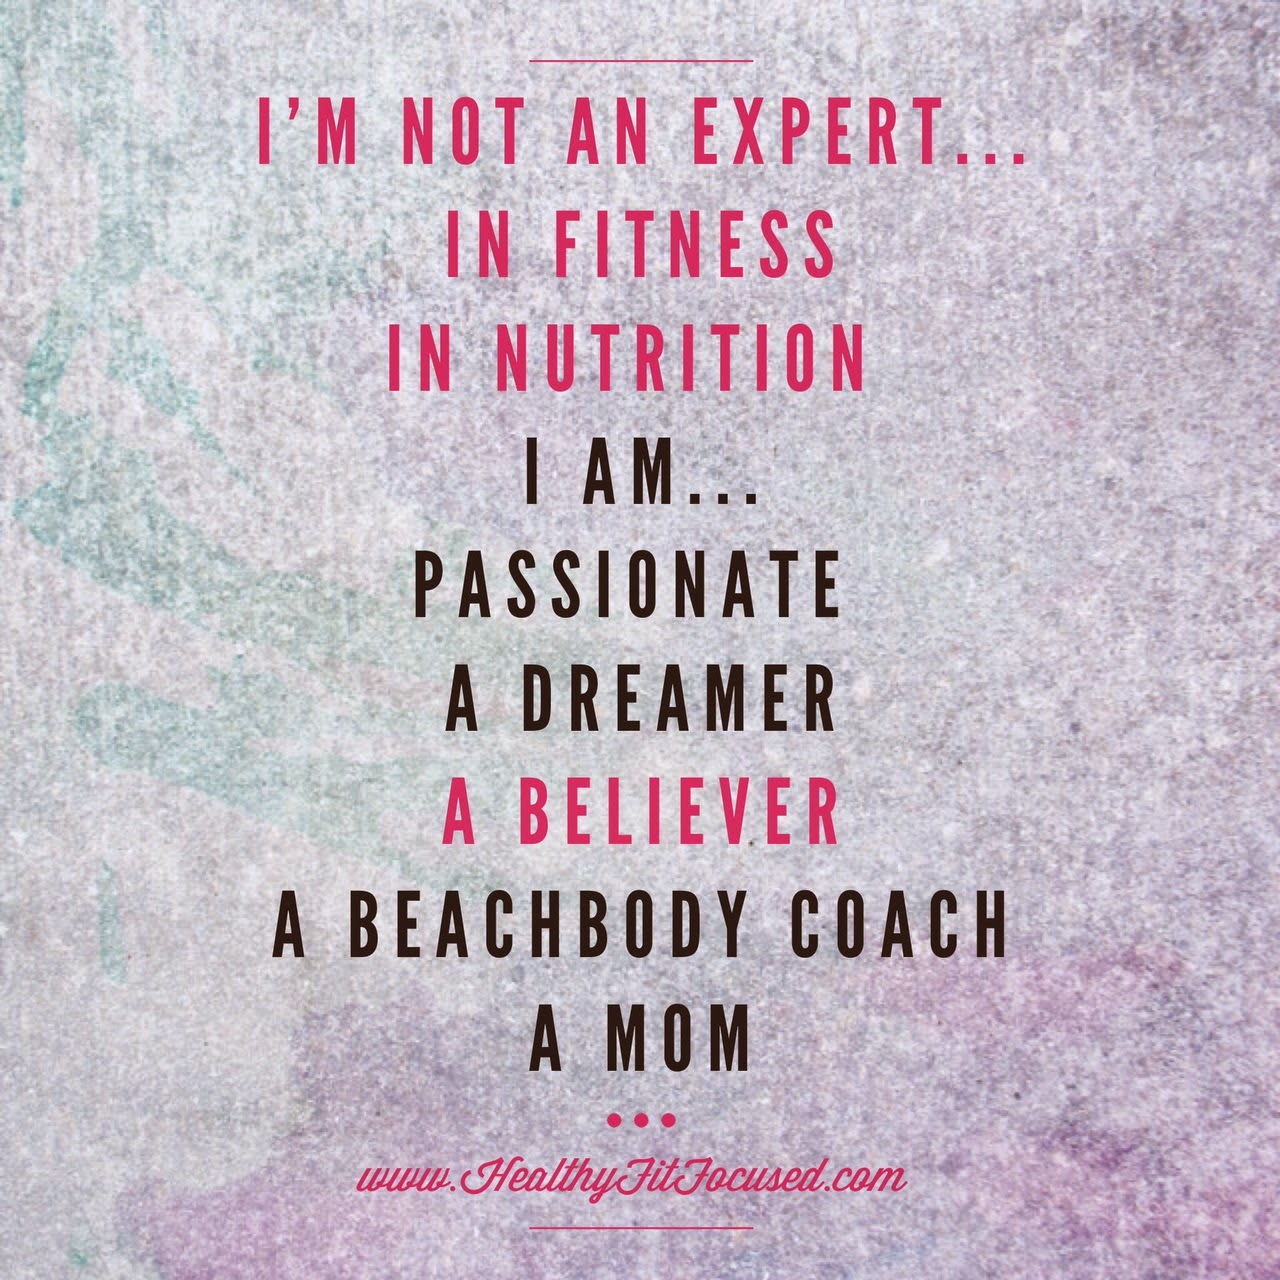 I'm not an expert, I'm a mom with passion.  Beachbody Coaching, Helping coaches become successful!  I'm looking for 5 highly motivated people ready to earn a significant income by helping others. www.HealthyFitFocused.com 